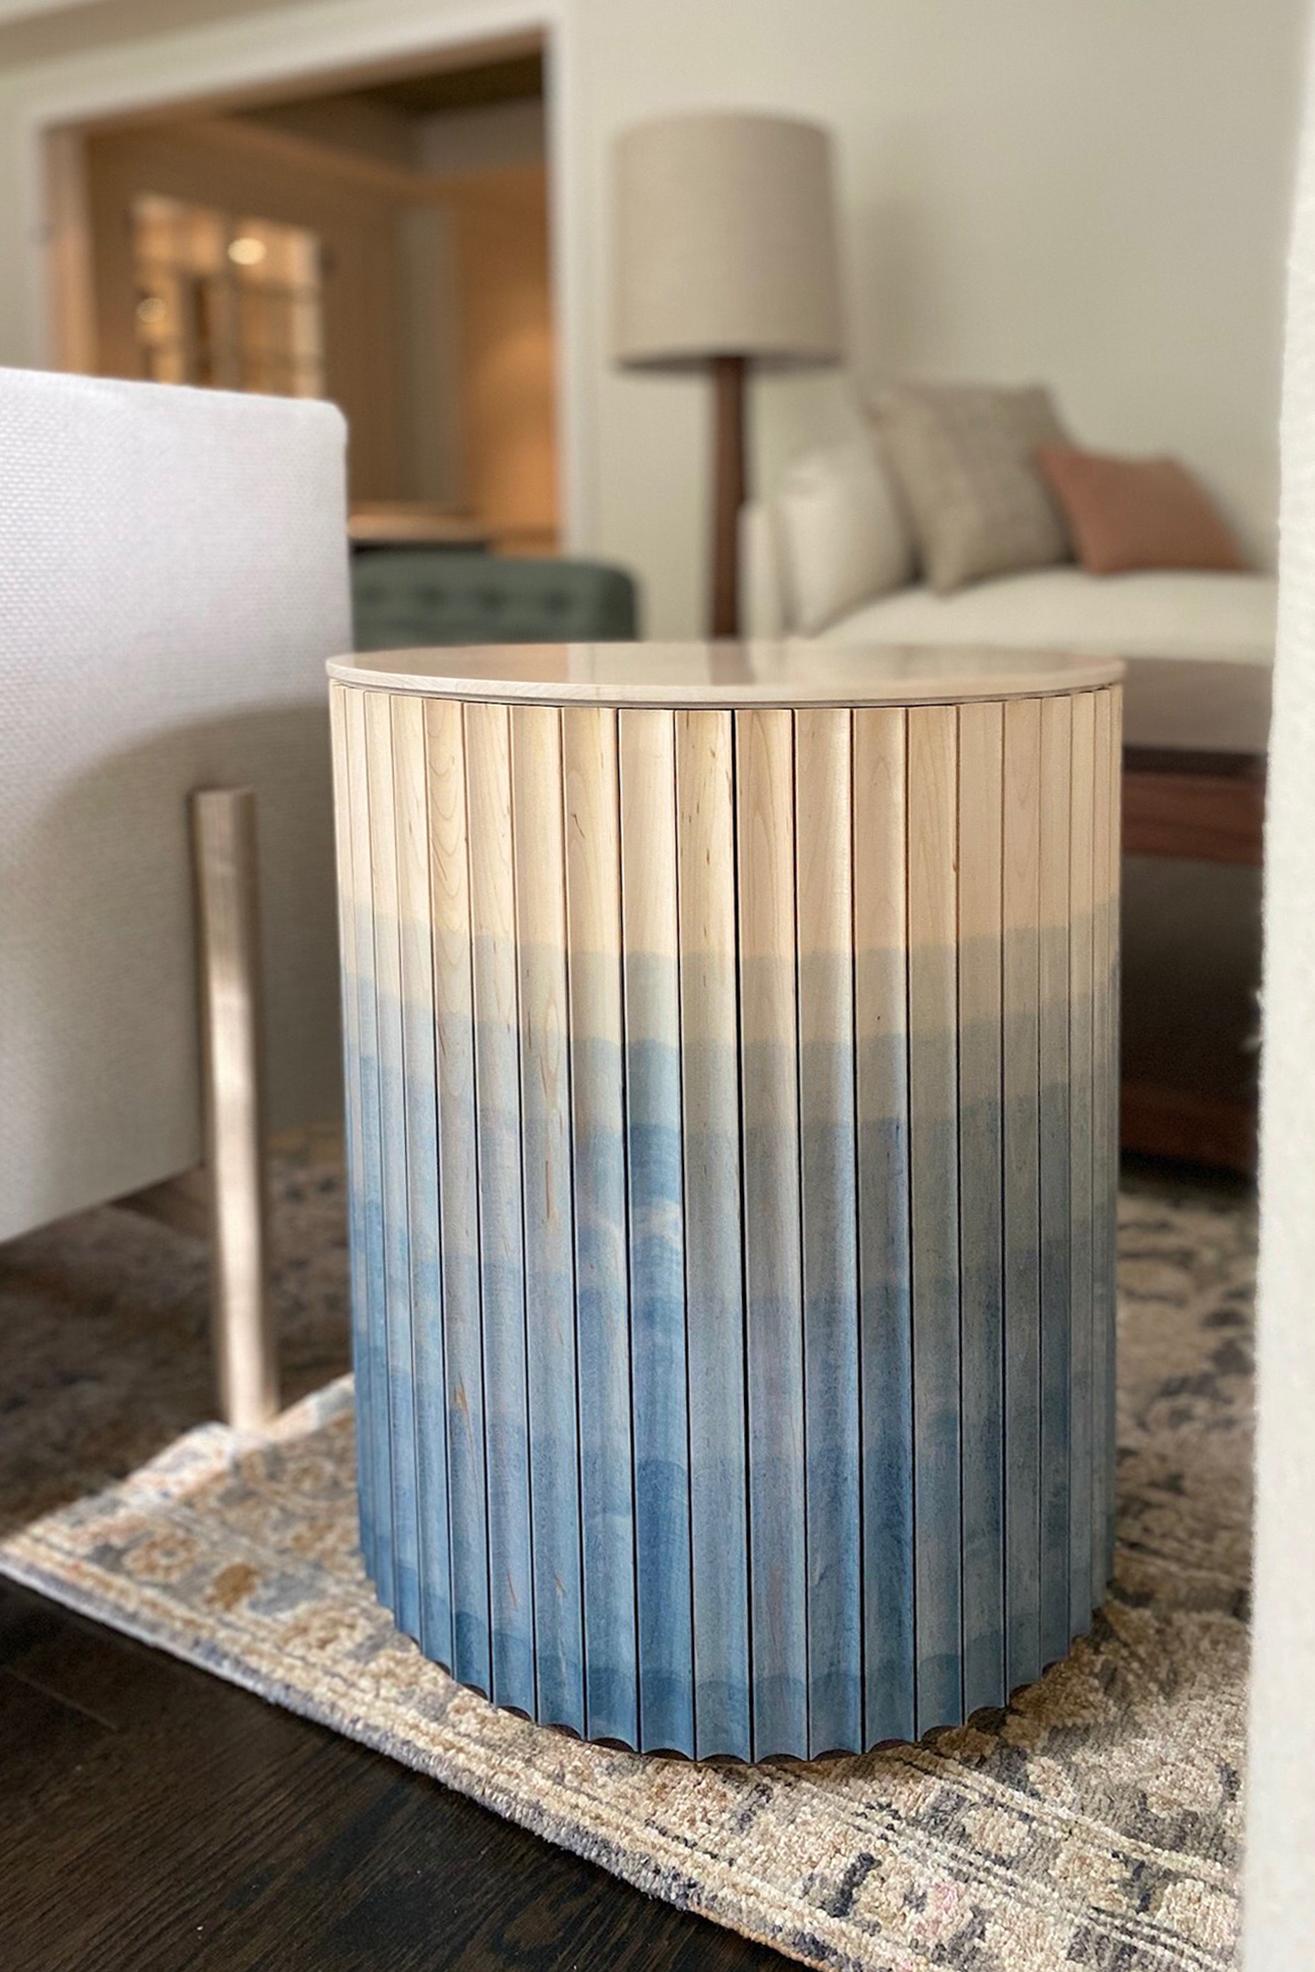 Pilar end table by Indo Made
One of a kind.
Dimensions: Ø40.6 X H53.3 cm 
Materials: Maple with Cobalt Blue ombre finish, Crema Marfil marble top.
Also available in other materials and finishes. 

Each piece is carefully handcrafted by our